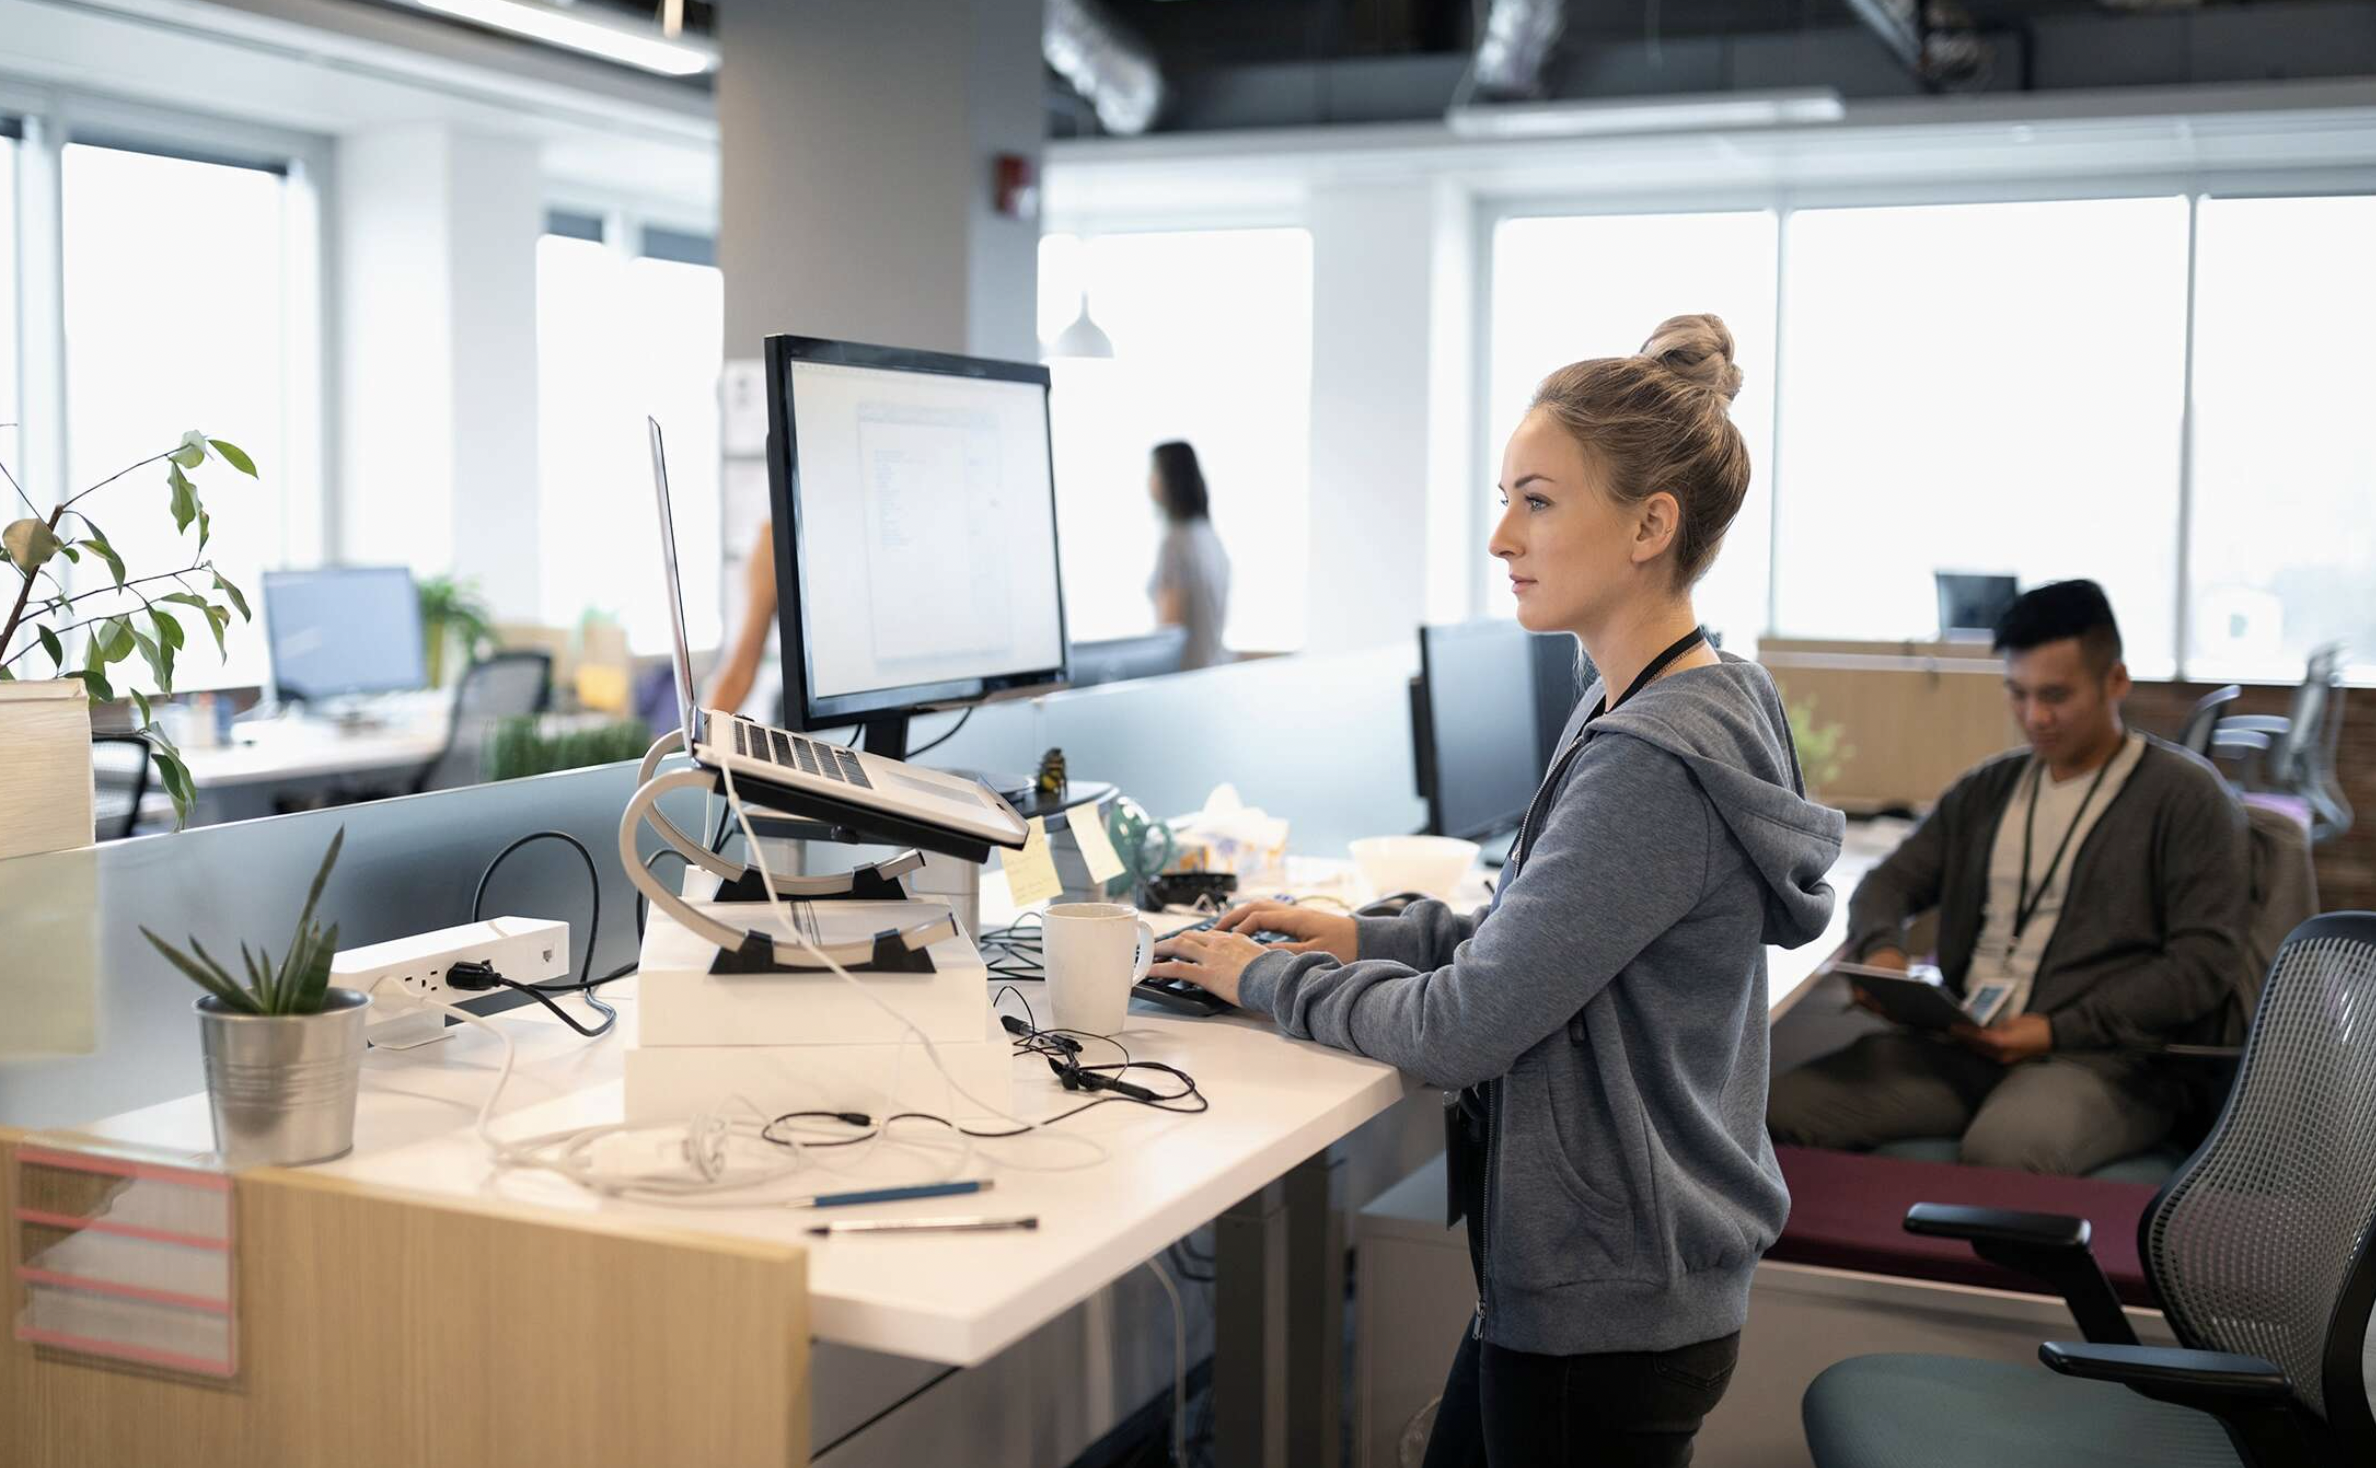 WHAT ARE THE BENEFITS OF A STANDING DESK?